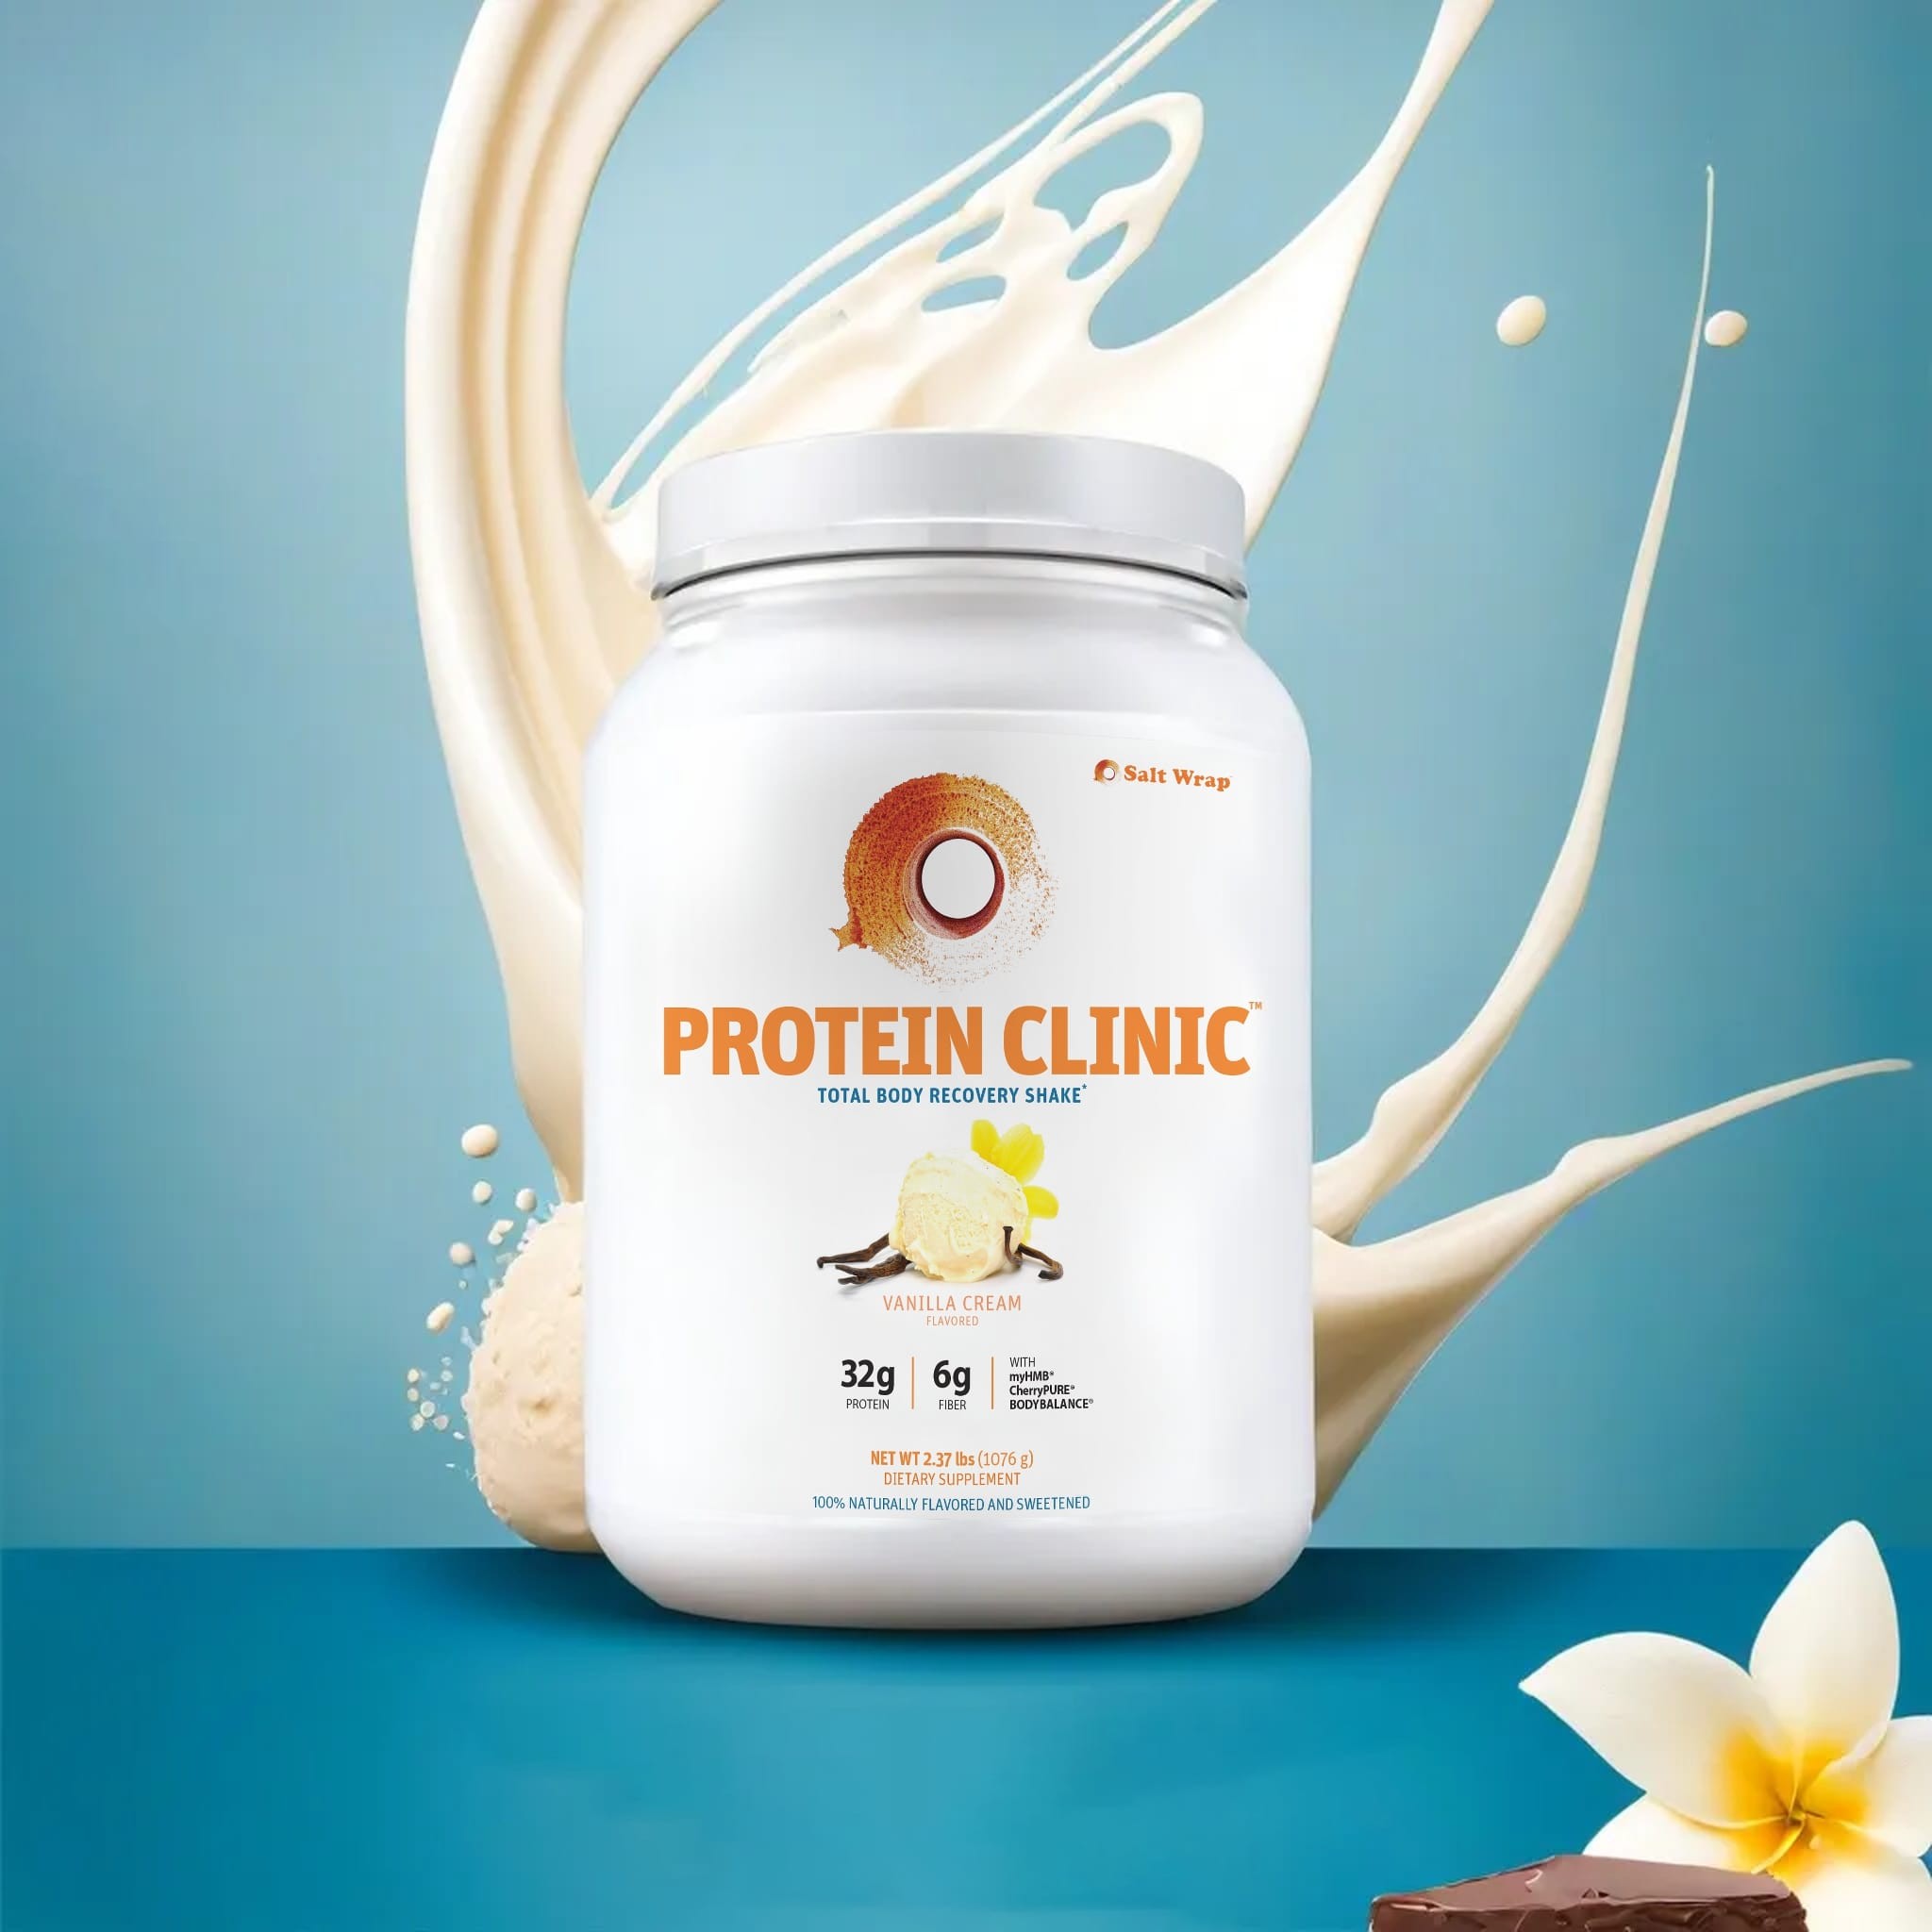 You’re going to love the new Vanilla Cream Protein Clinic™.